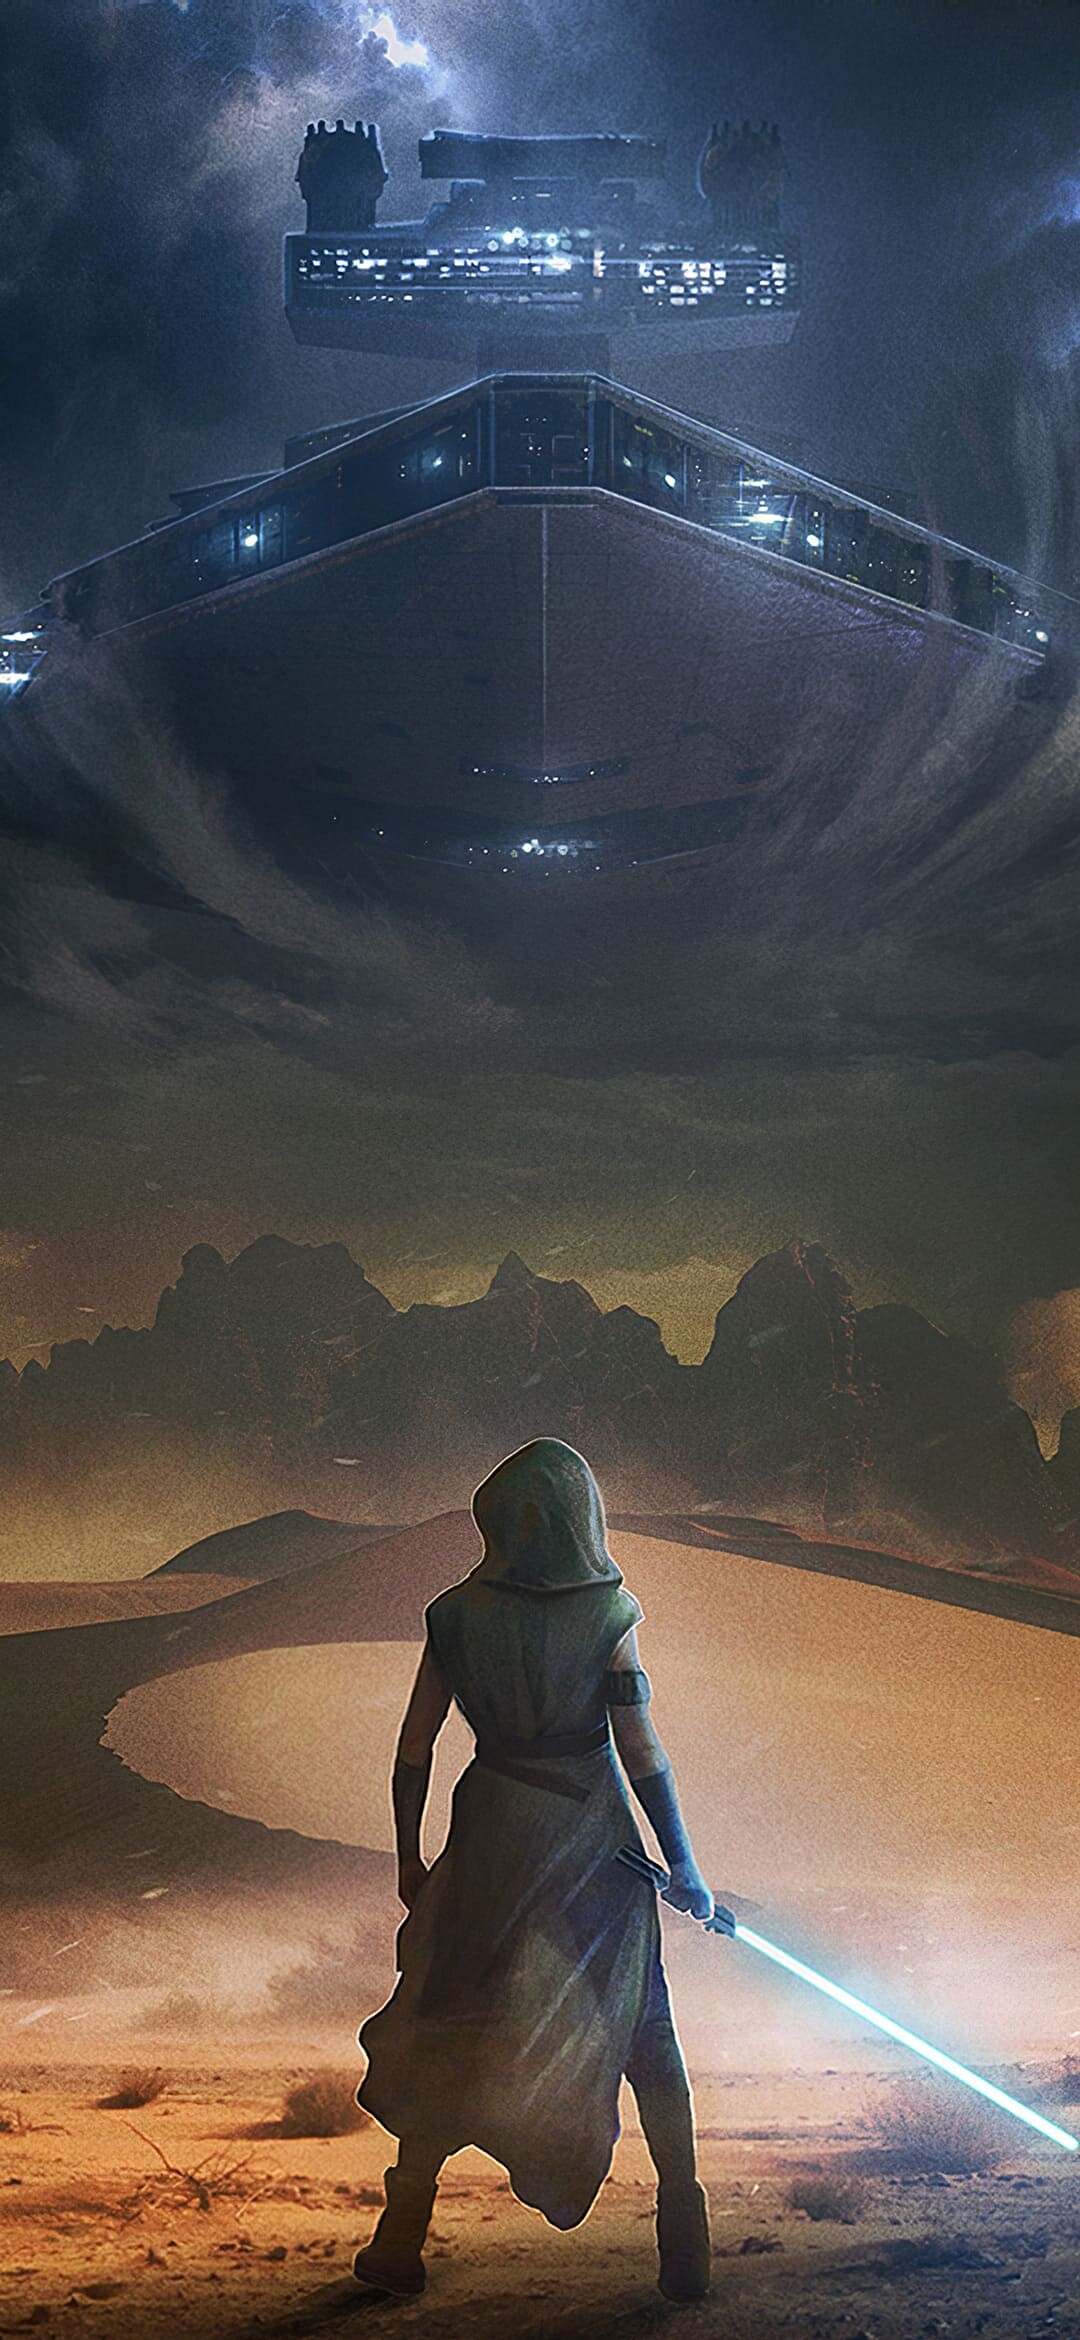 Star Wars: The Rise of Skywalker, A 2019 American epic space opera film. 1080x2340 HD Background.